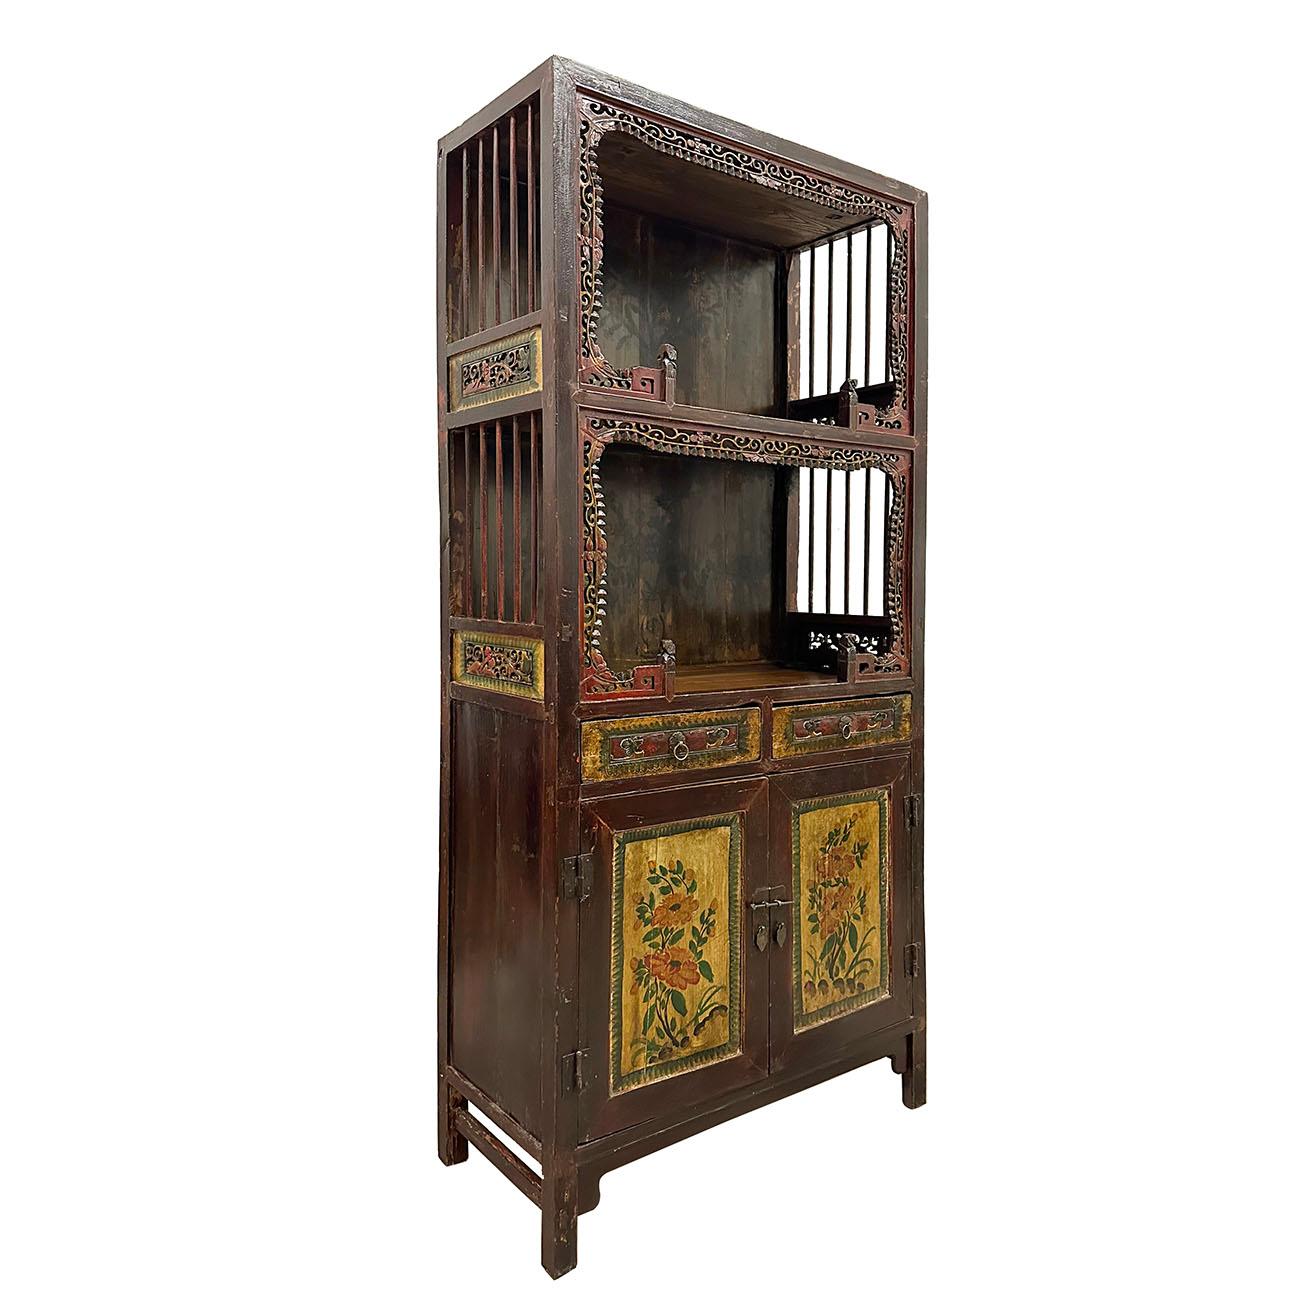 

Very well constructed with two removable open doors cabinet and have coordinated antiqued hardware.
This beautiful carved Display Cabinet/dresser has lot of detailed open carving works on the front and side. It has open carving works around the